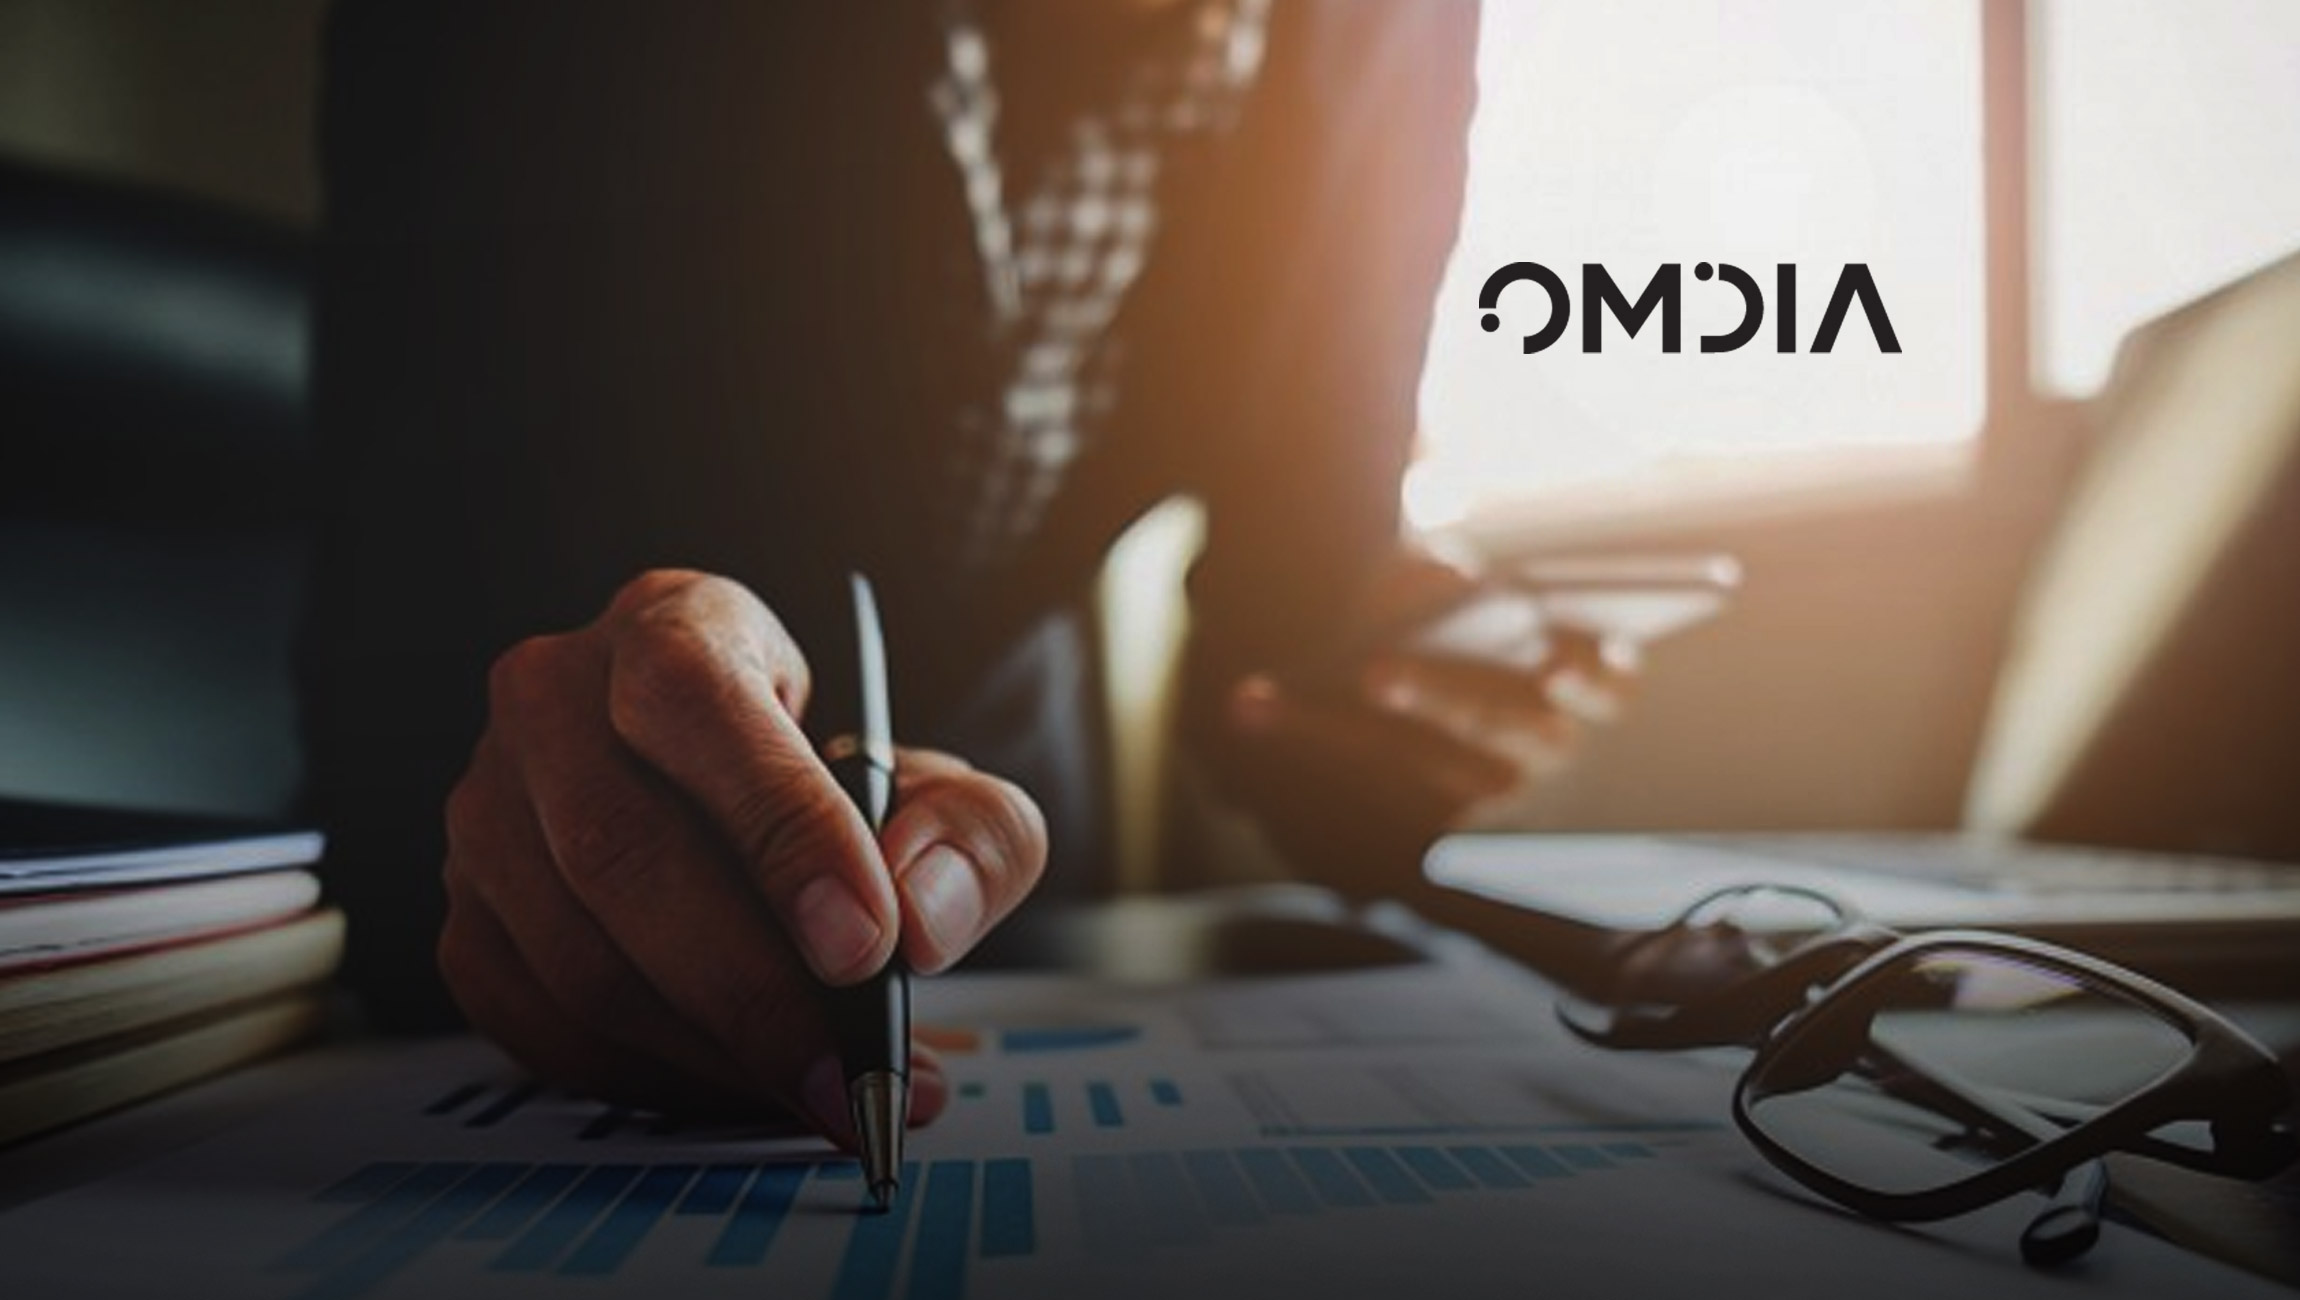 Artificial Intelligence Software Is Being Deployed via a Wide Range of Business Models With Annual Revenue for Hybrid Solutions Reaching $45.5 Billion in 2025, According to Omdia